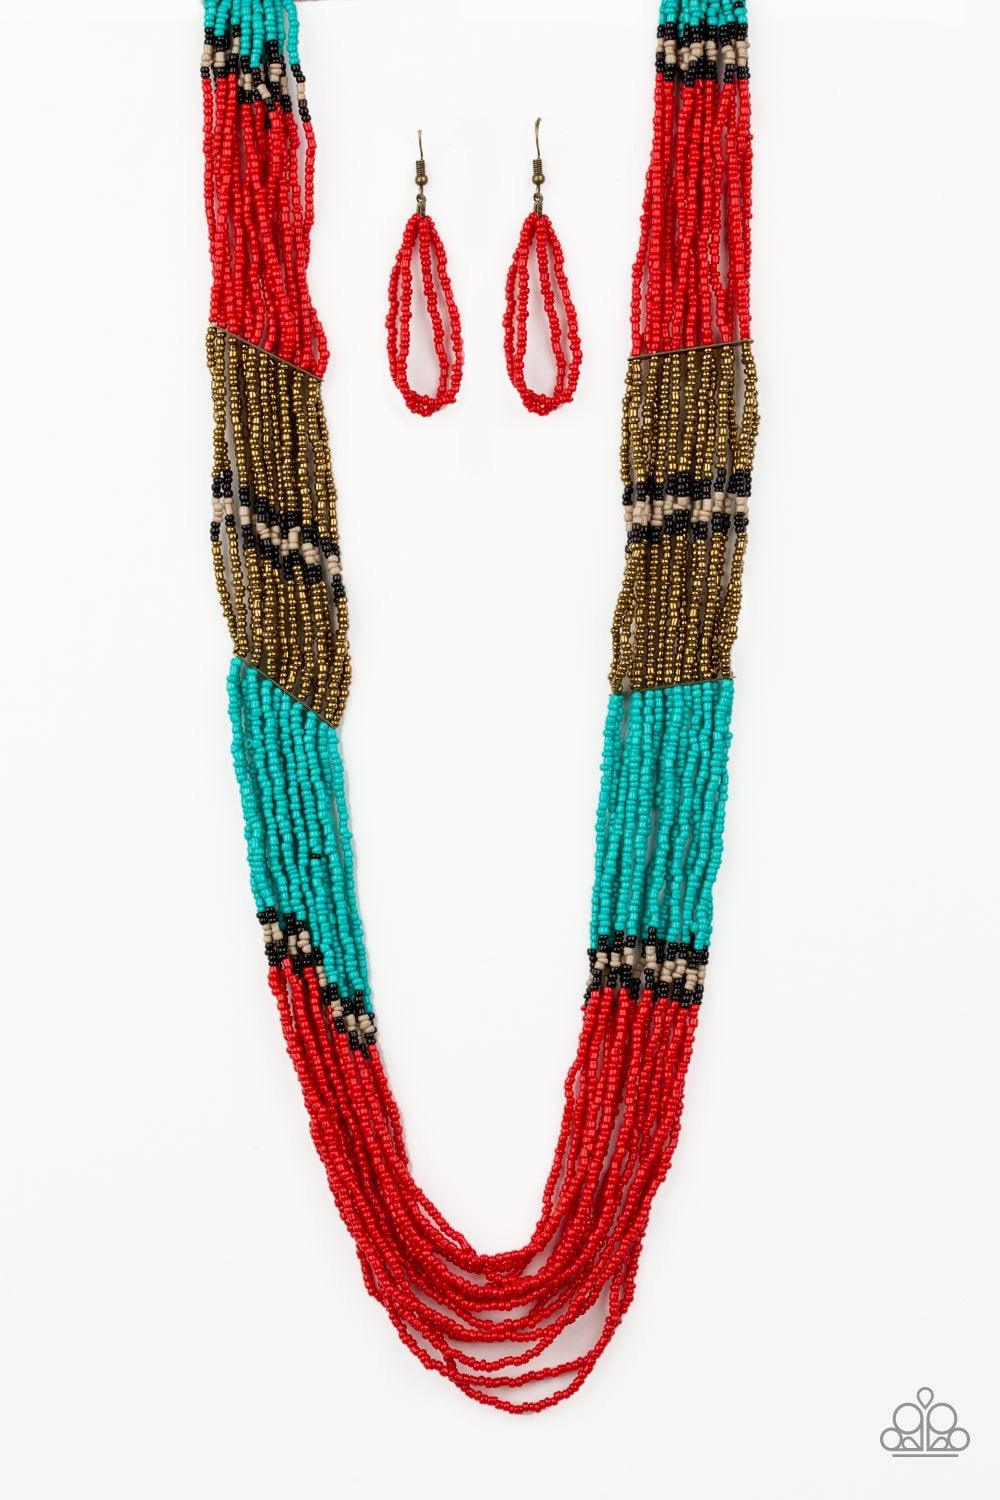 Paparazzi Accessories Rio Roamer - Red An assortment of black, brass, red, tan, and turquoise seed beads are threaded along invisible wires, creating colorful layers across the chest. Features an adjustable clasp closure. Jewelry